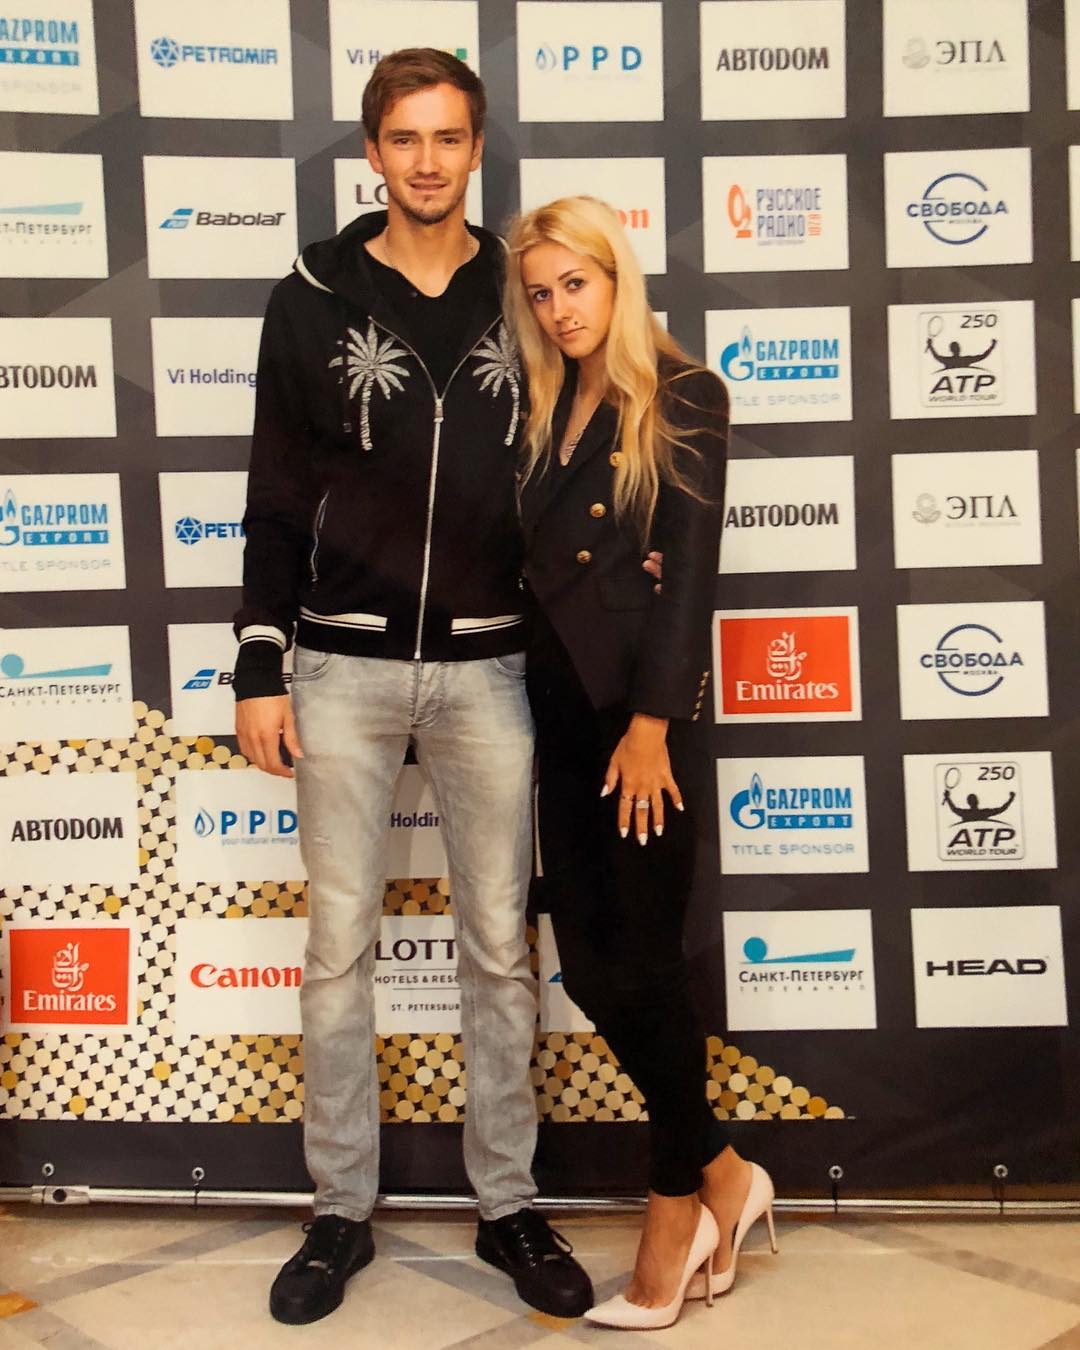 Daria Medvedev wearing a black coat and pants with her husband who is wearing a black jacket and gray pants